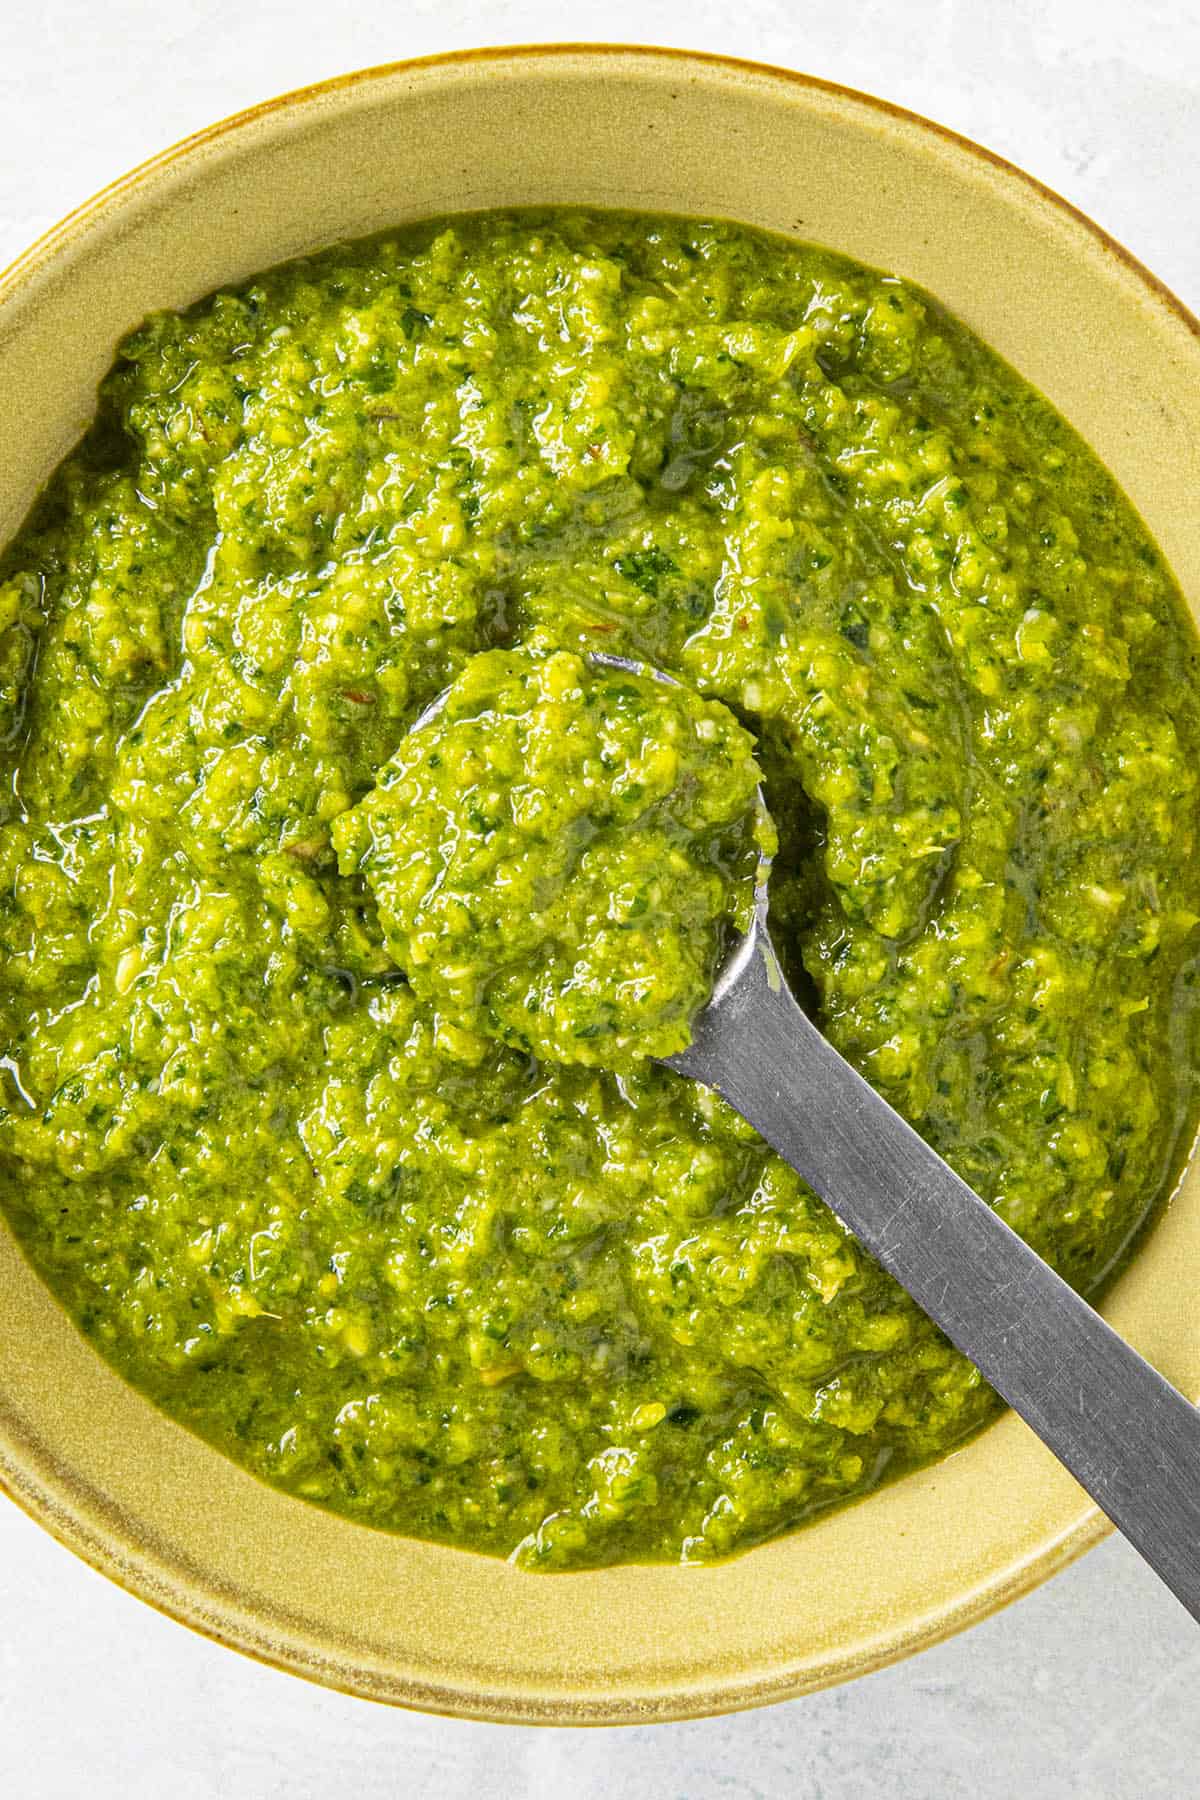 Thick and flavorful Green Curry Paste, ready for curry making